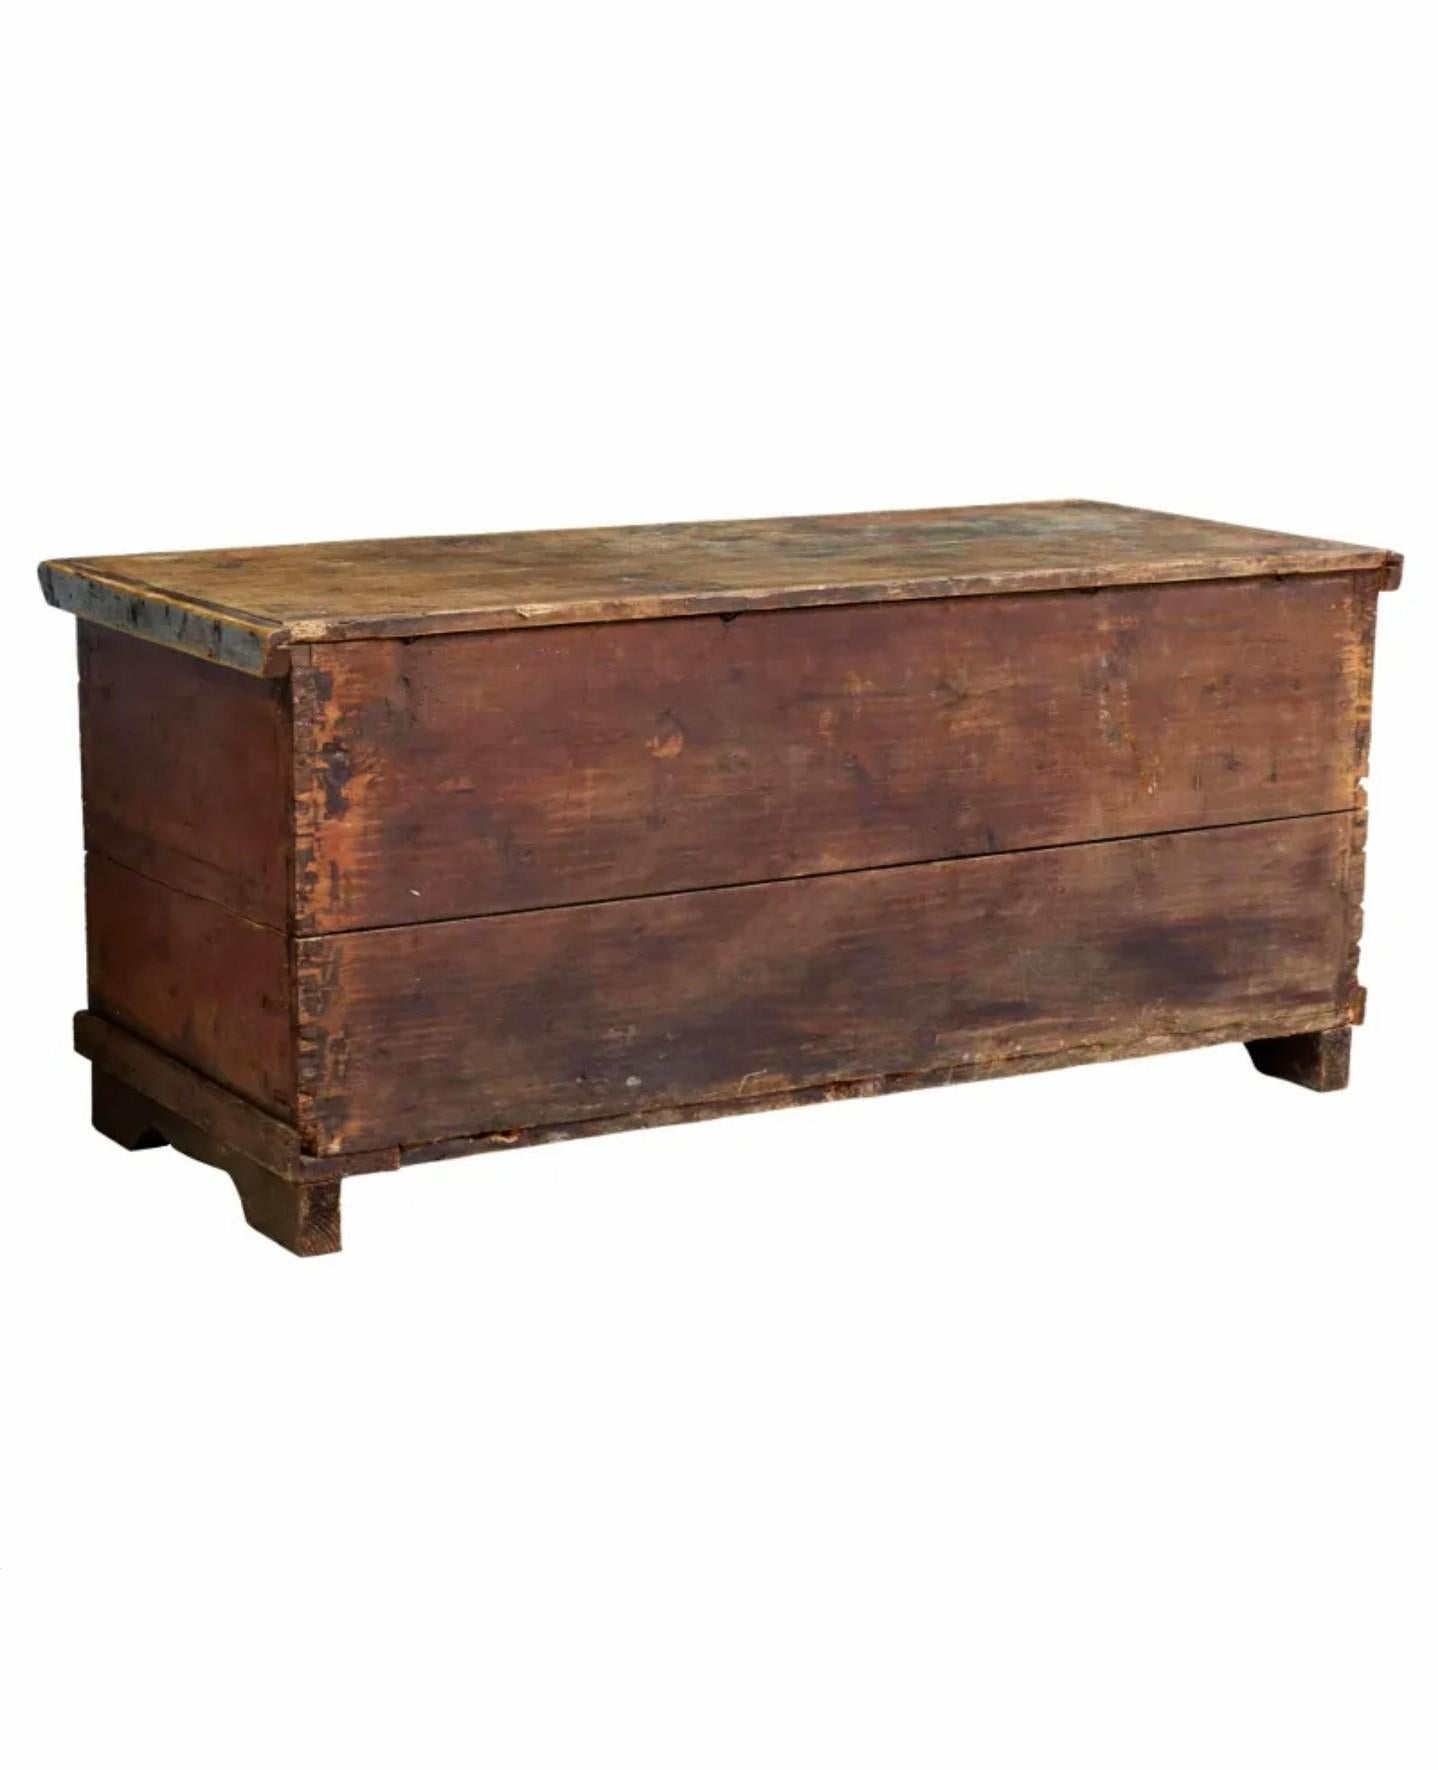 Early 19th Century Scandinavian Hand-Painted Pine Blanket Chest For Sale 2